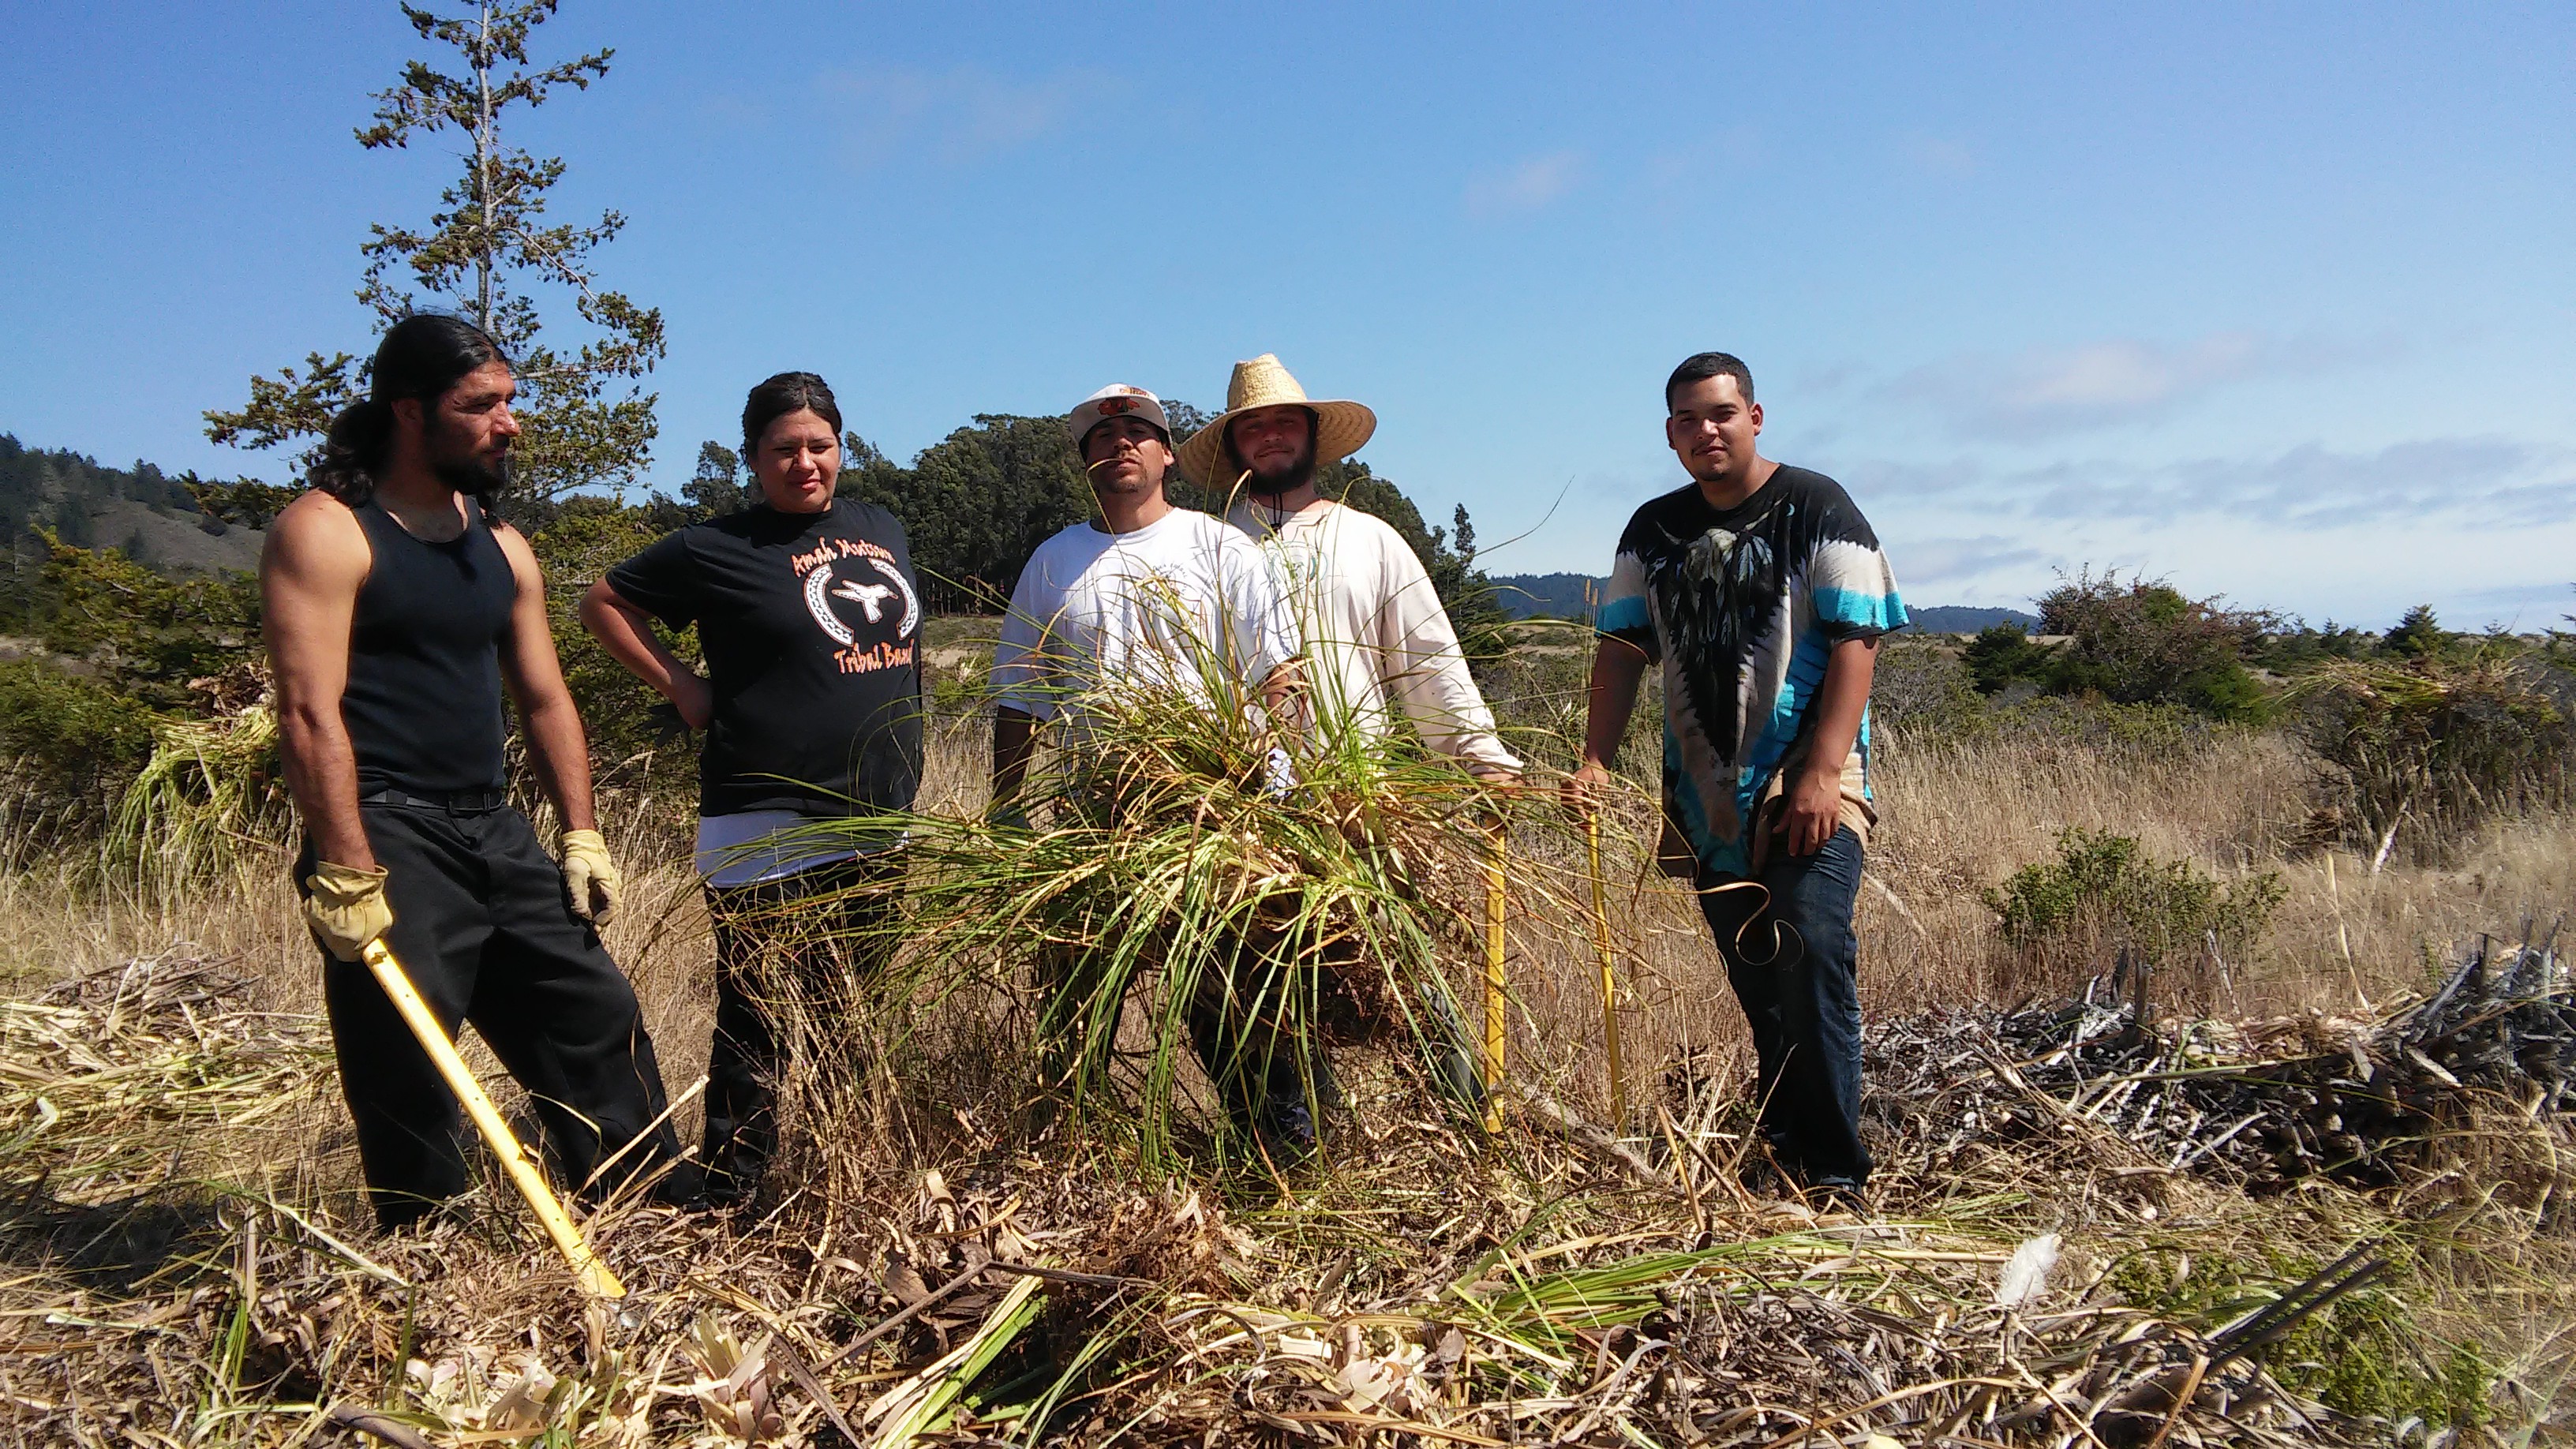 The August 2016 Amah Mutsun Native Stewards. From left to right: Abran Lopez, Natalie Garcia, Gabriel Pineda, Paul Lopez and Nathan Vasquez.